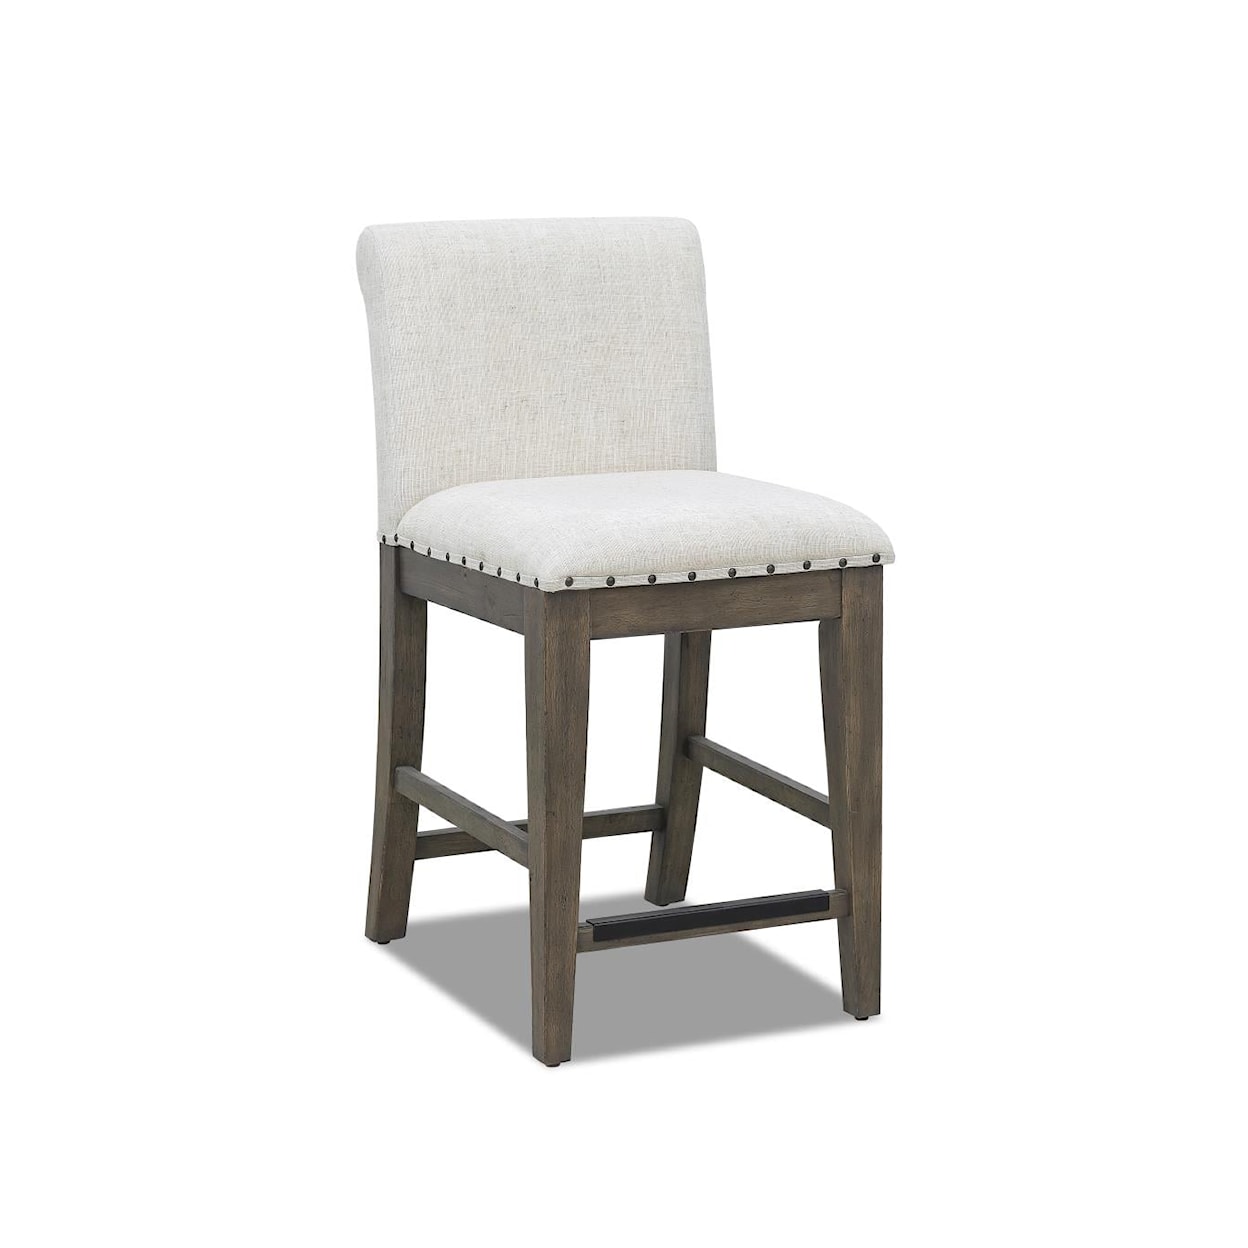 Trisha Yearwood Home Collection by Legacy Classic Hometown Upholstered Counter Height Stool